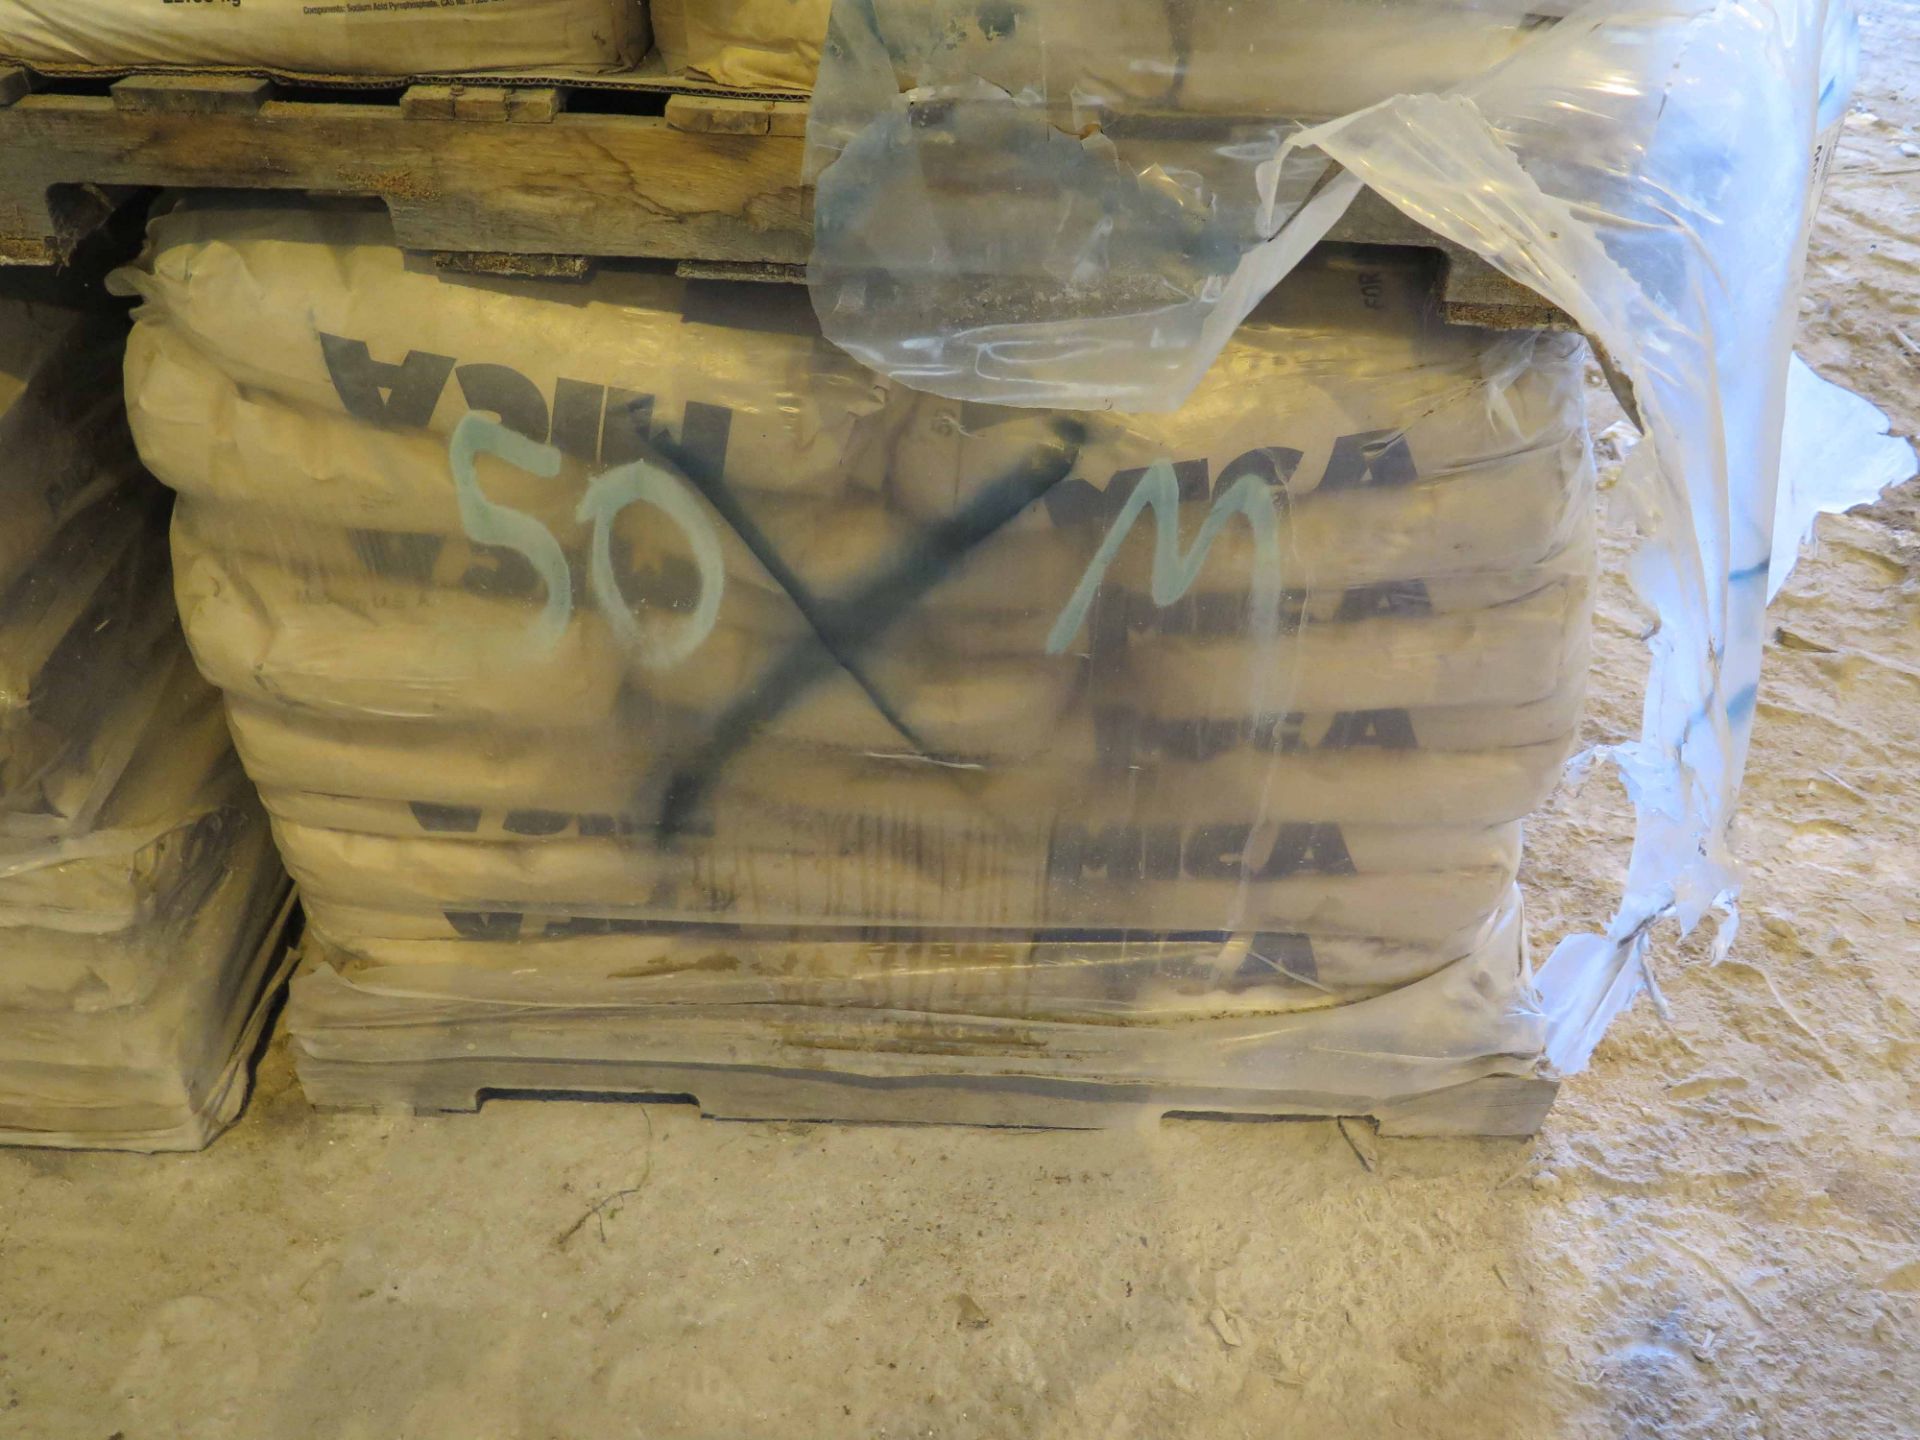 LOT OF MICA MEDIUM (approx. 444 bags) (Location #1: 374 Walter White Road, Trinity, TX 75862) - Image 2 of 3